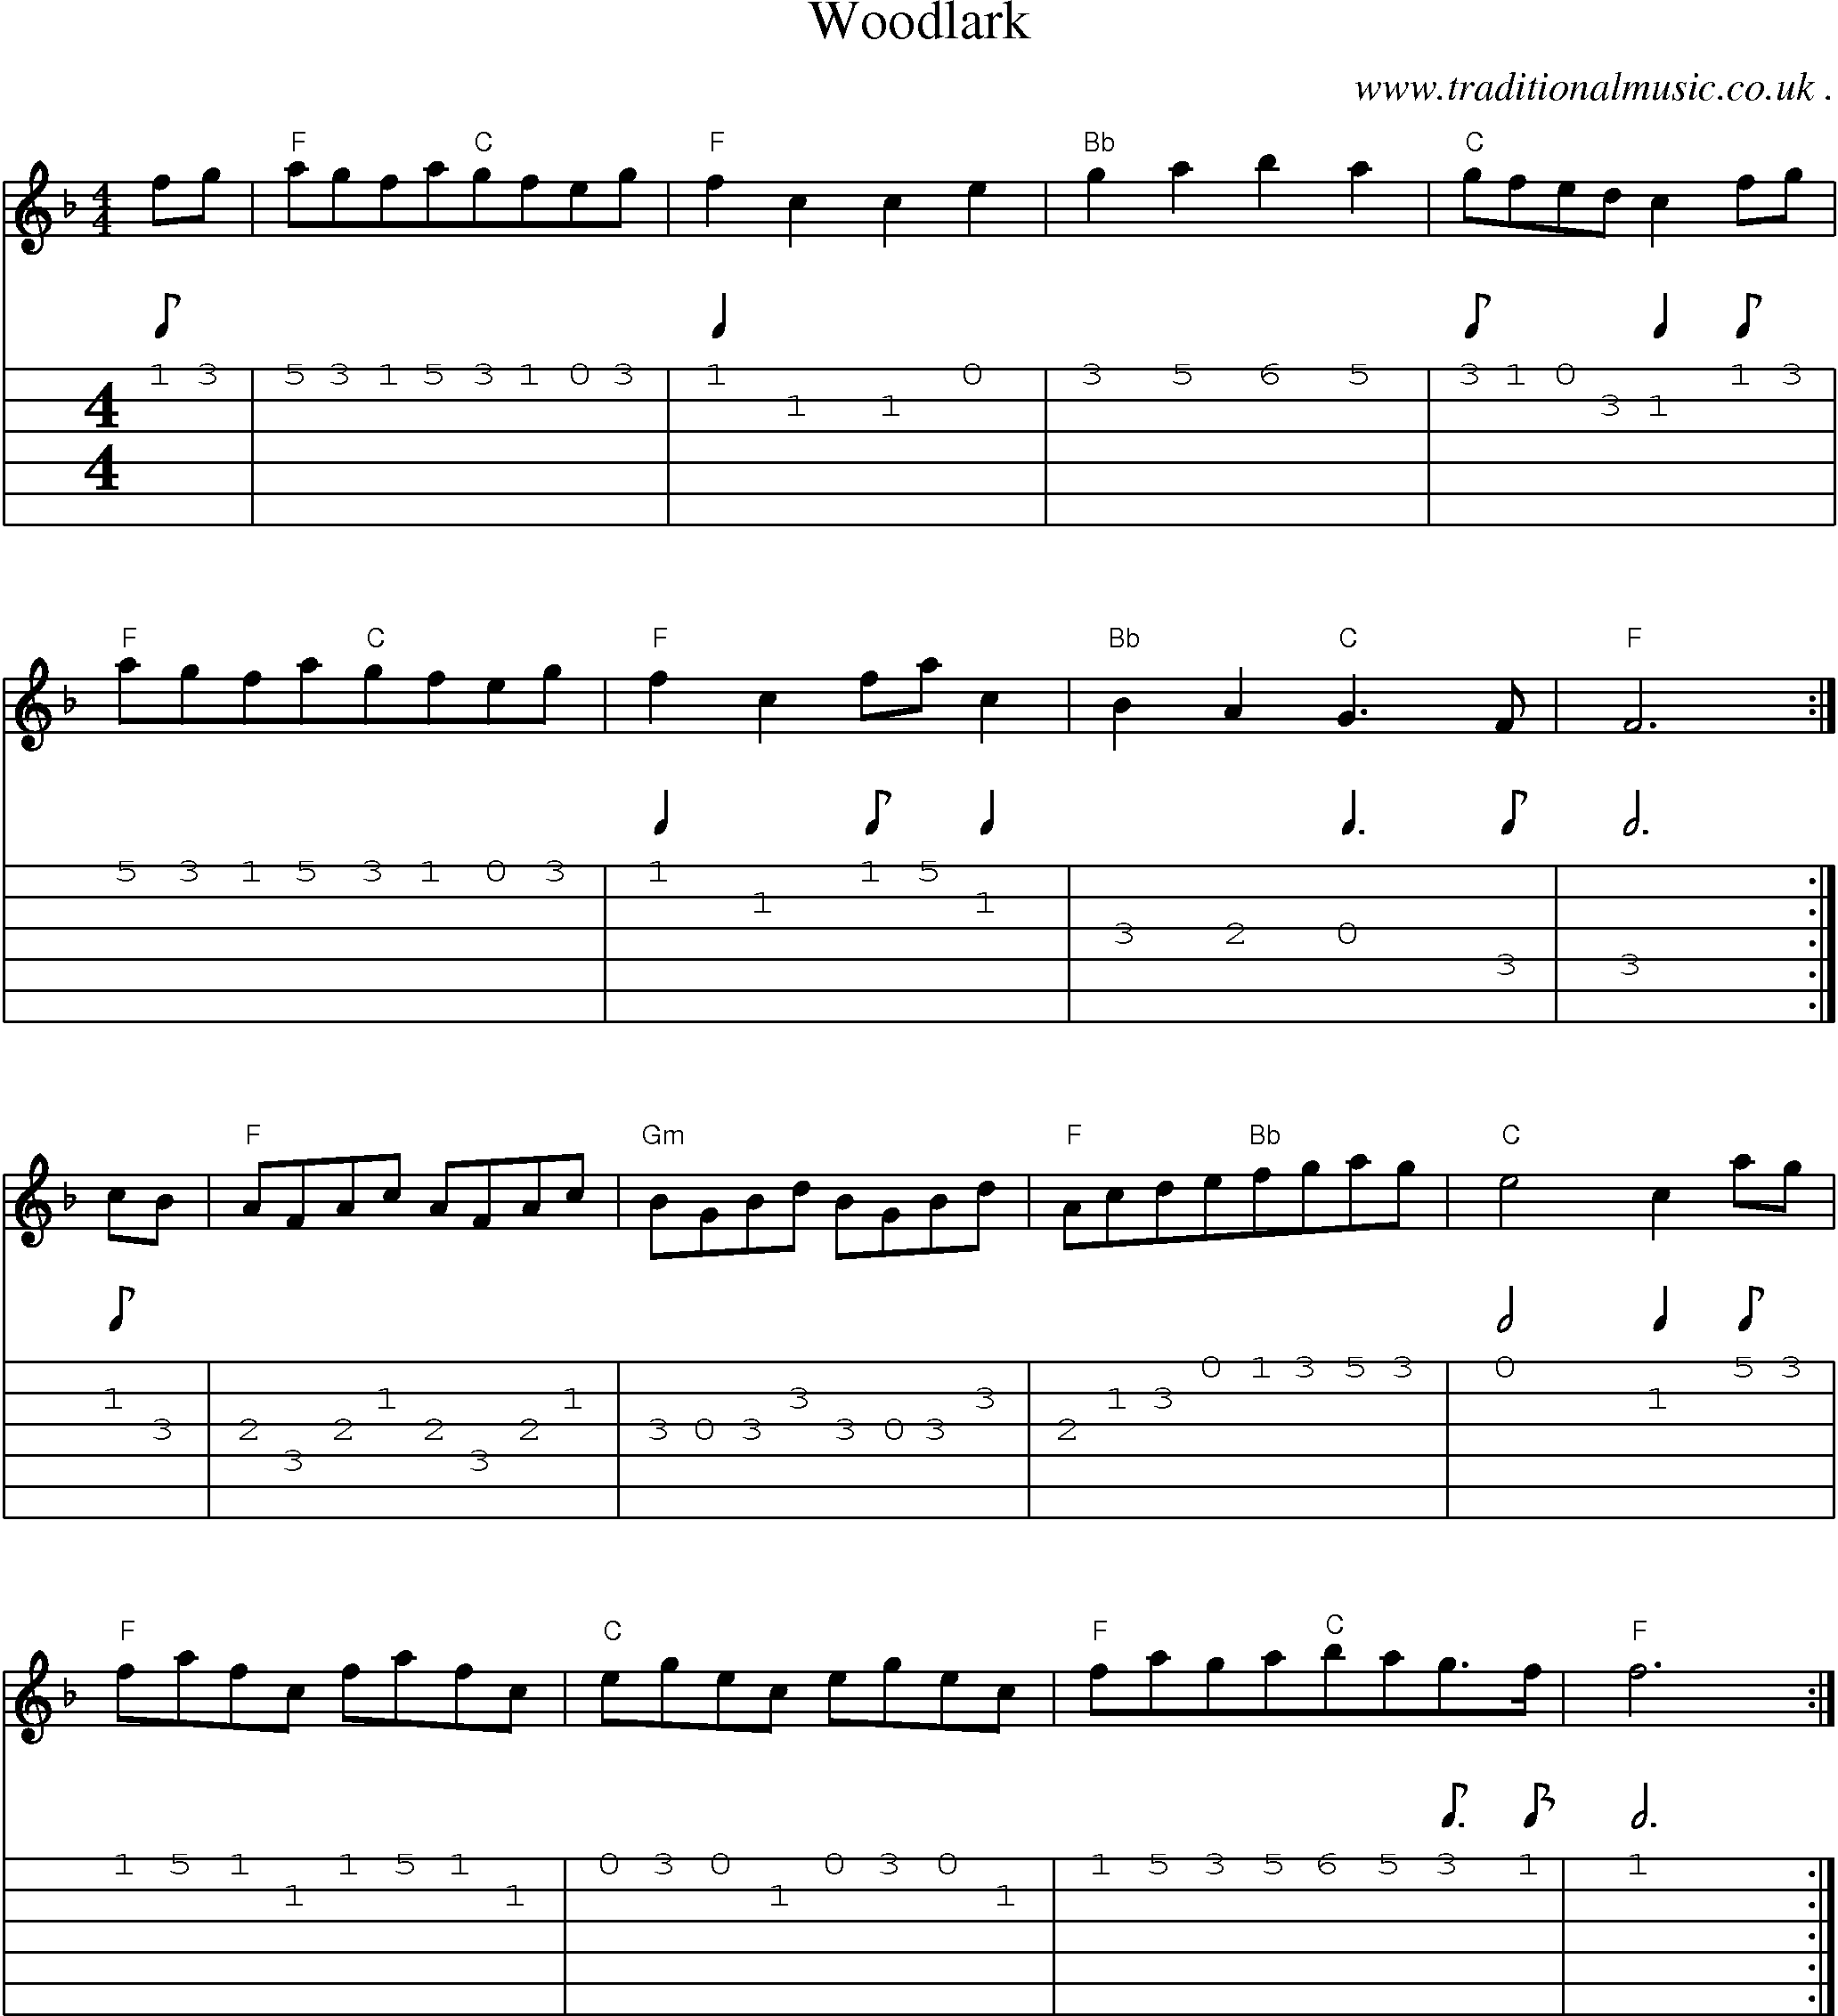 Sheet-Music and Guitar Tabs for Woodlark